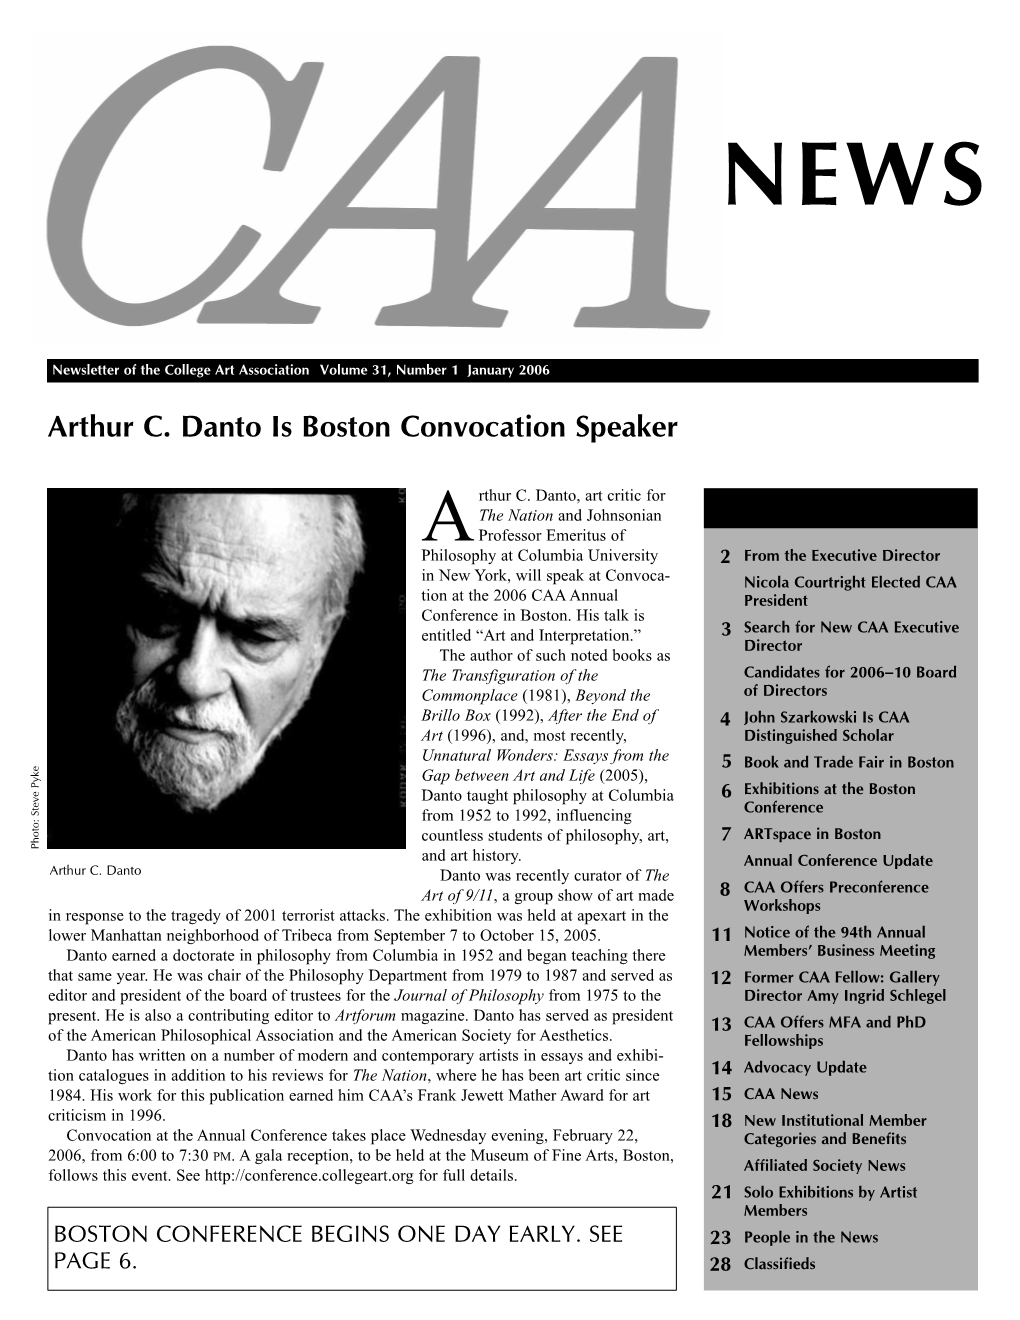 CAA News Criticism in 1996